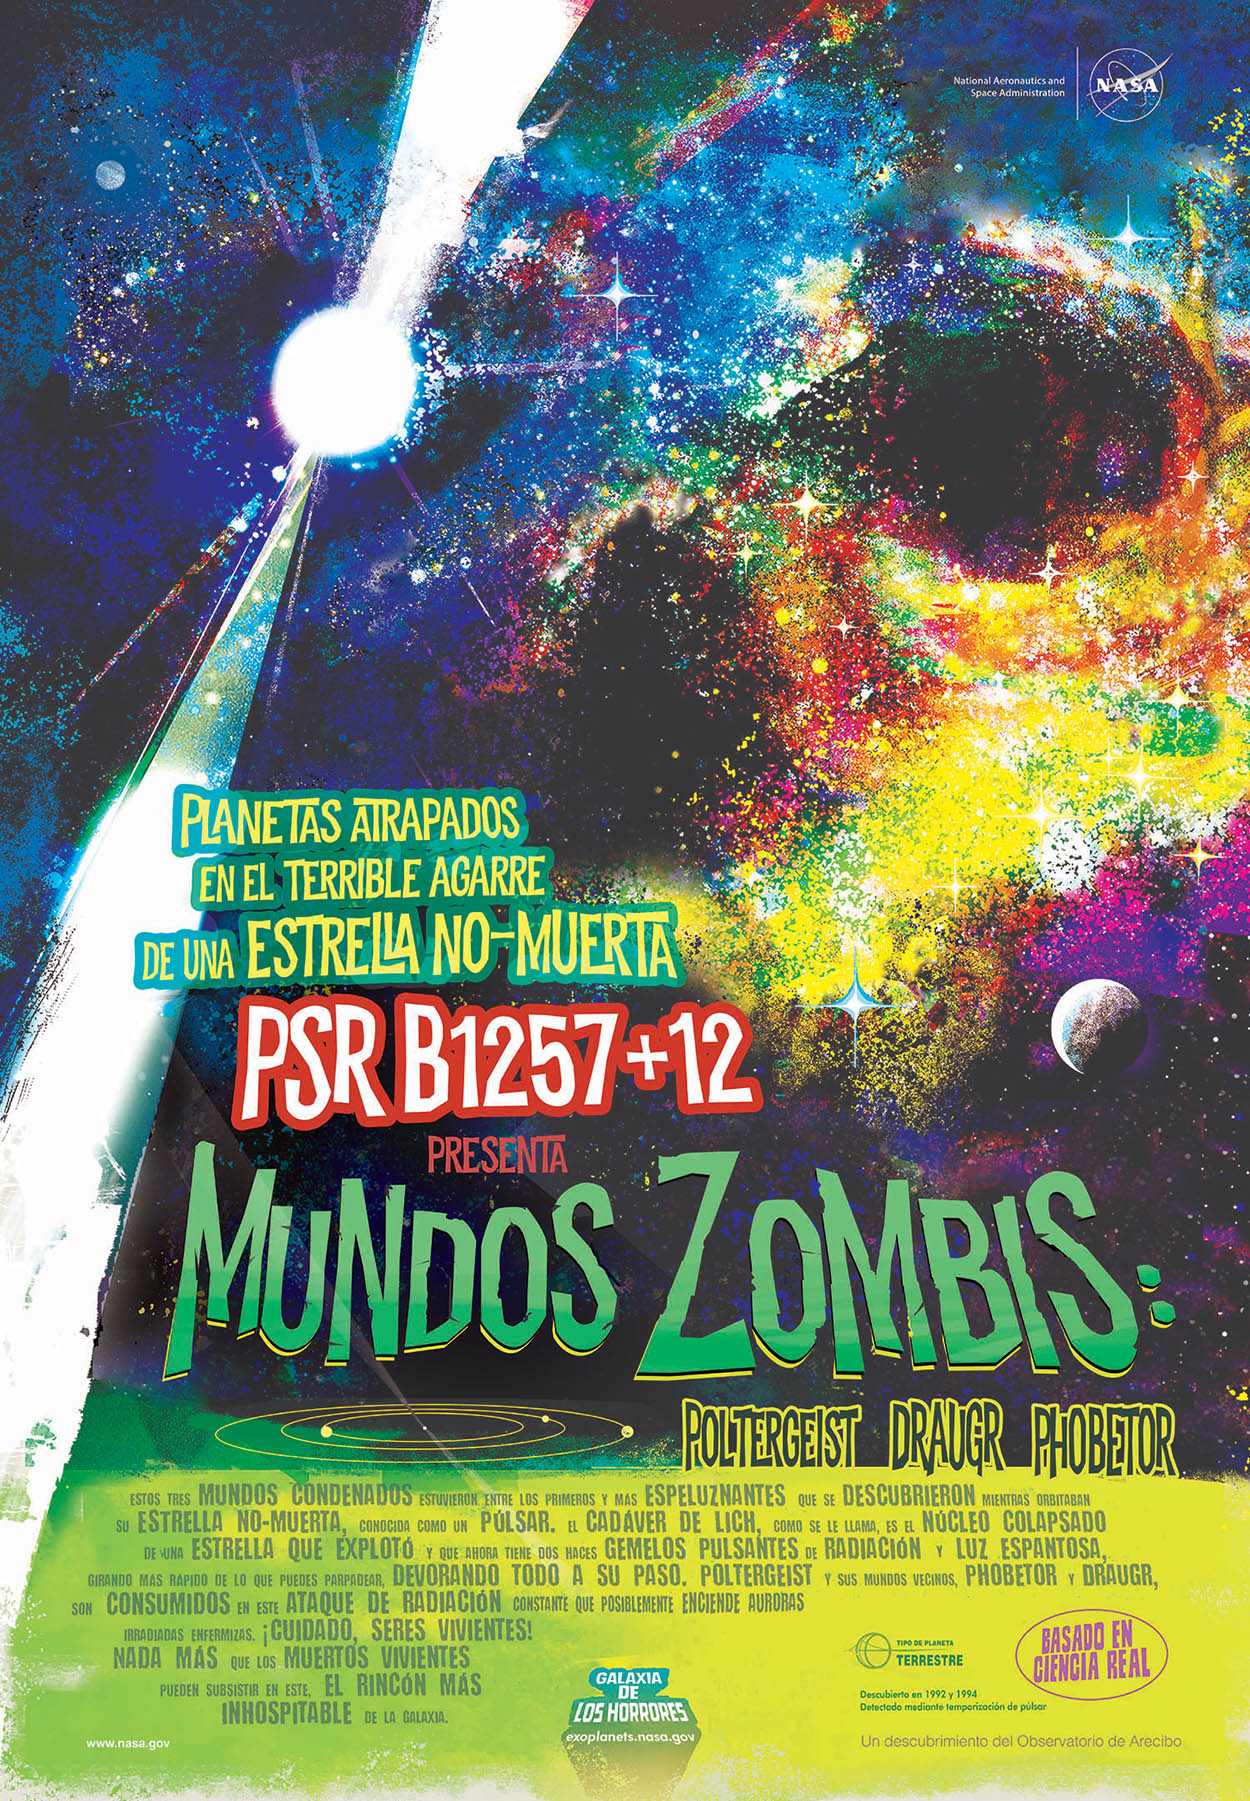 A poster done in the style of movie posters from the 1950s and 1960s showing the zombie worlds with a colorful nebula and a planet being blasted by twin beams of radiation by the pulsar host star. The overall image creates the look of a scary skull.